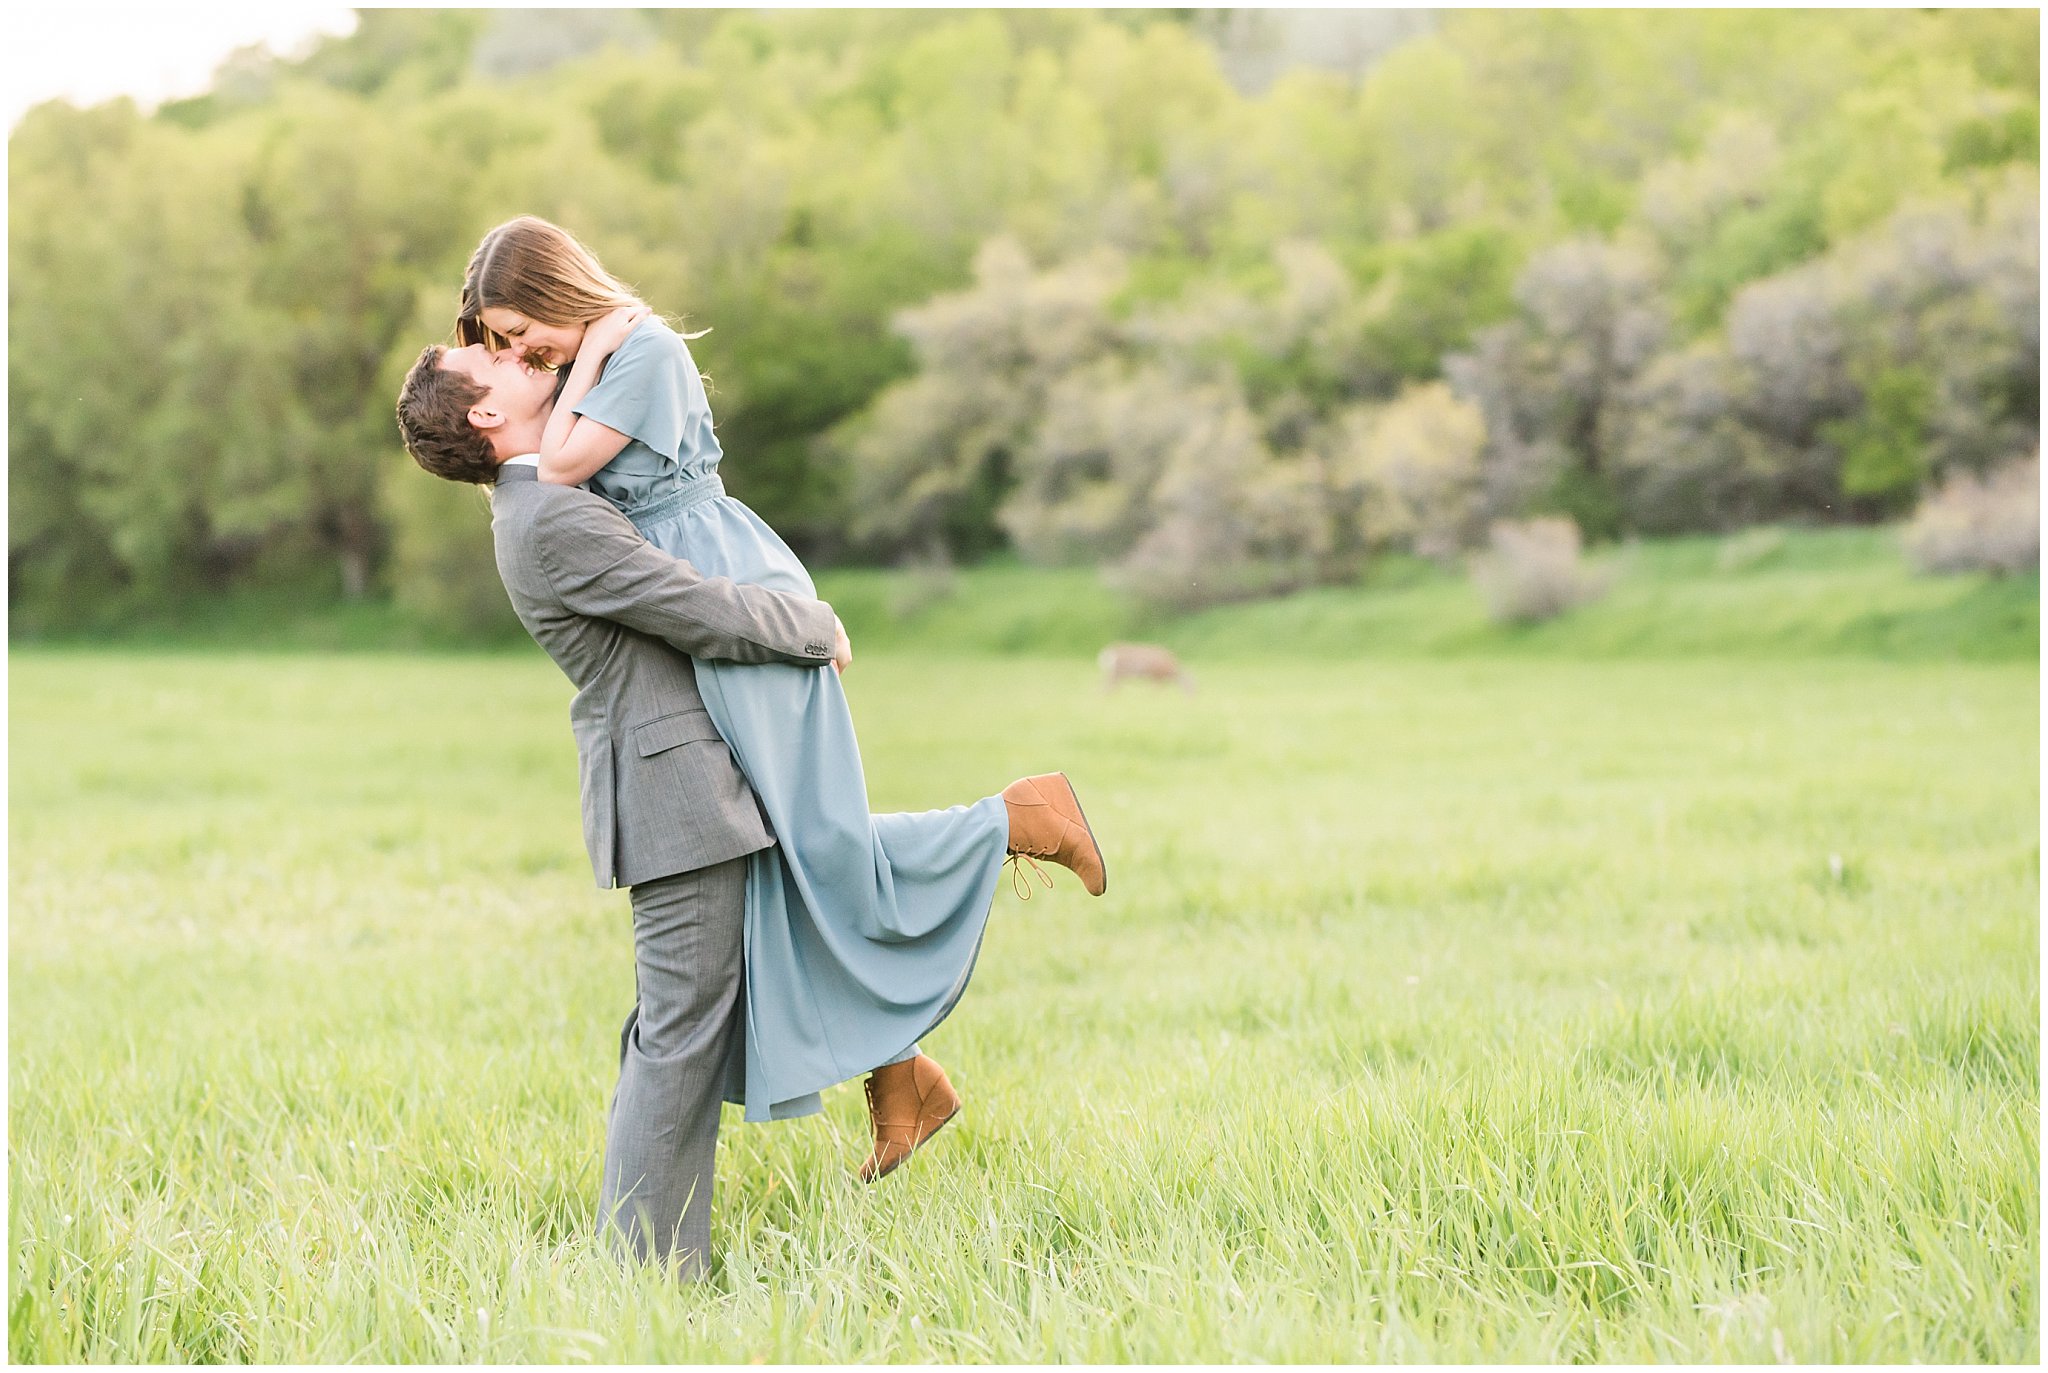 Couple does romantic lift during engagements in a meadow with deer | Top Utah Wedding and Couples Photos 2019 | Jessie and Dallin Photography